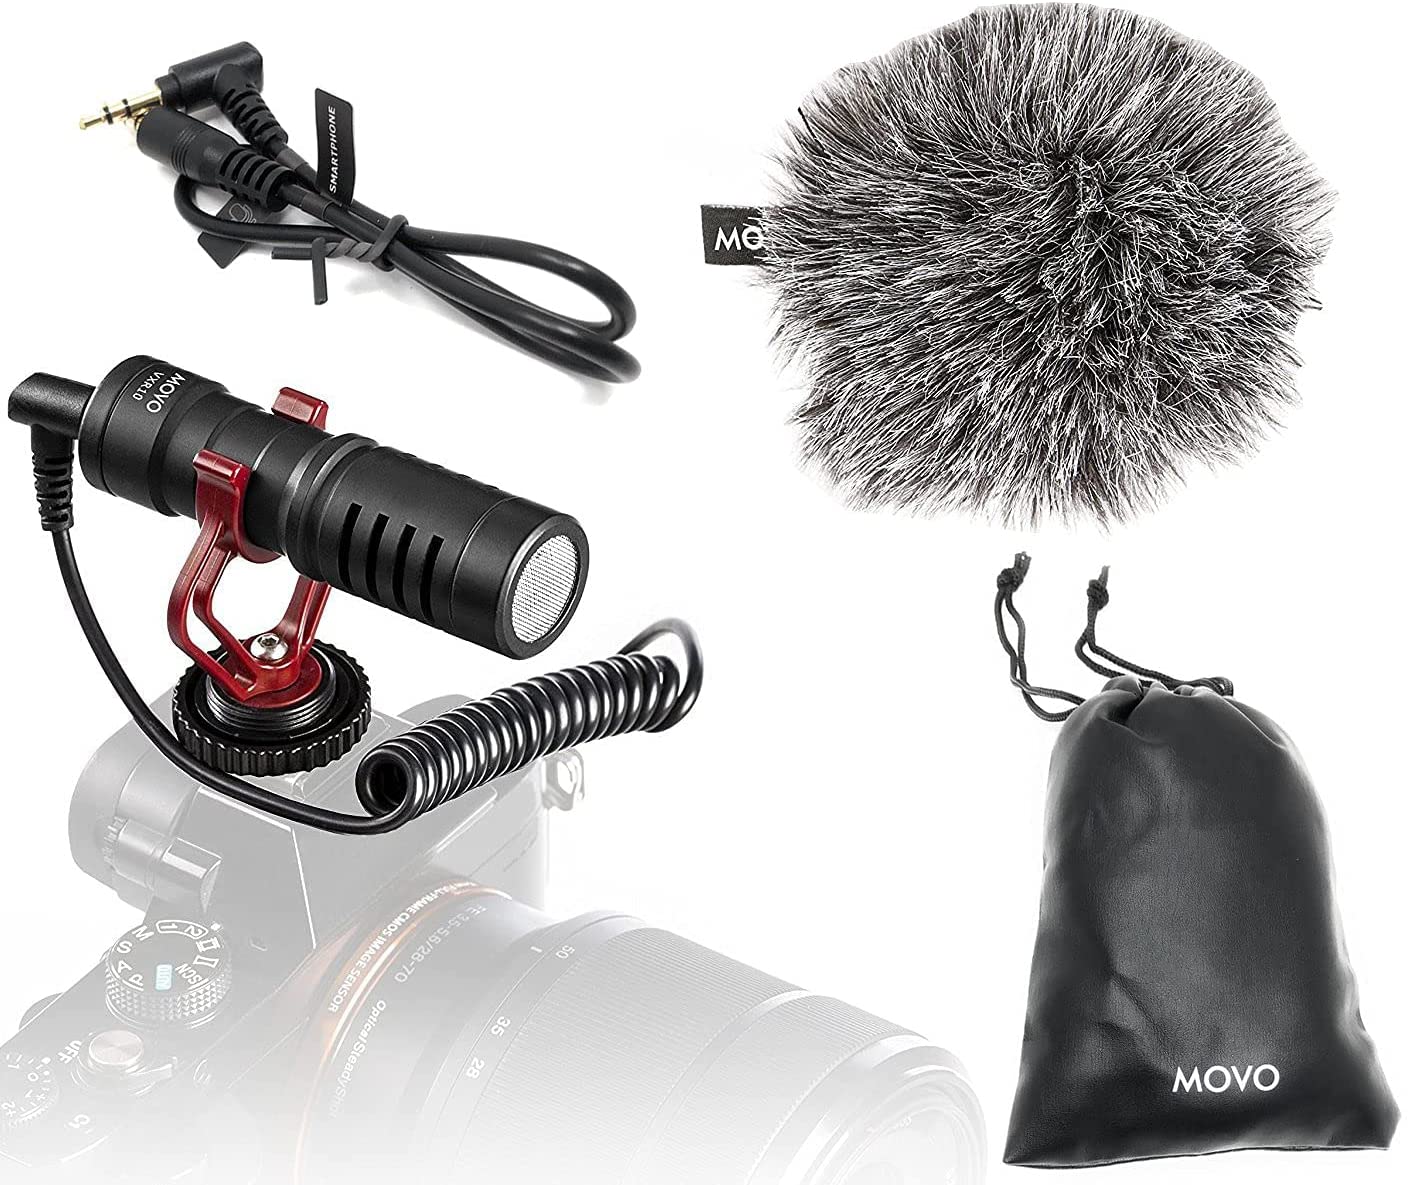 Movo VXR10 Universal Video Microphone image 